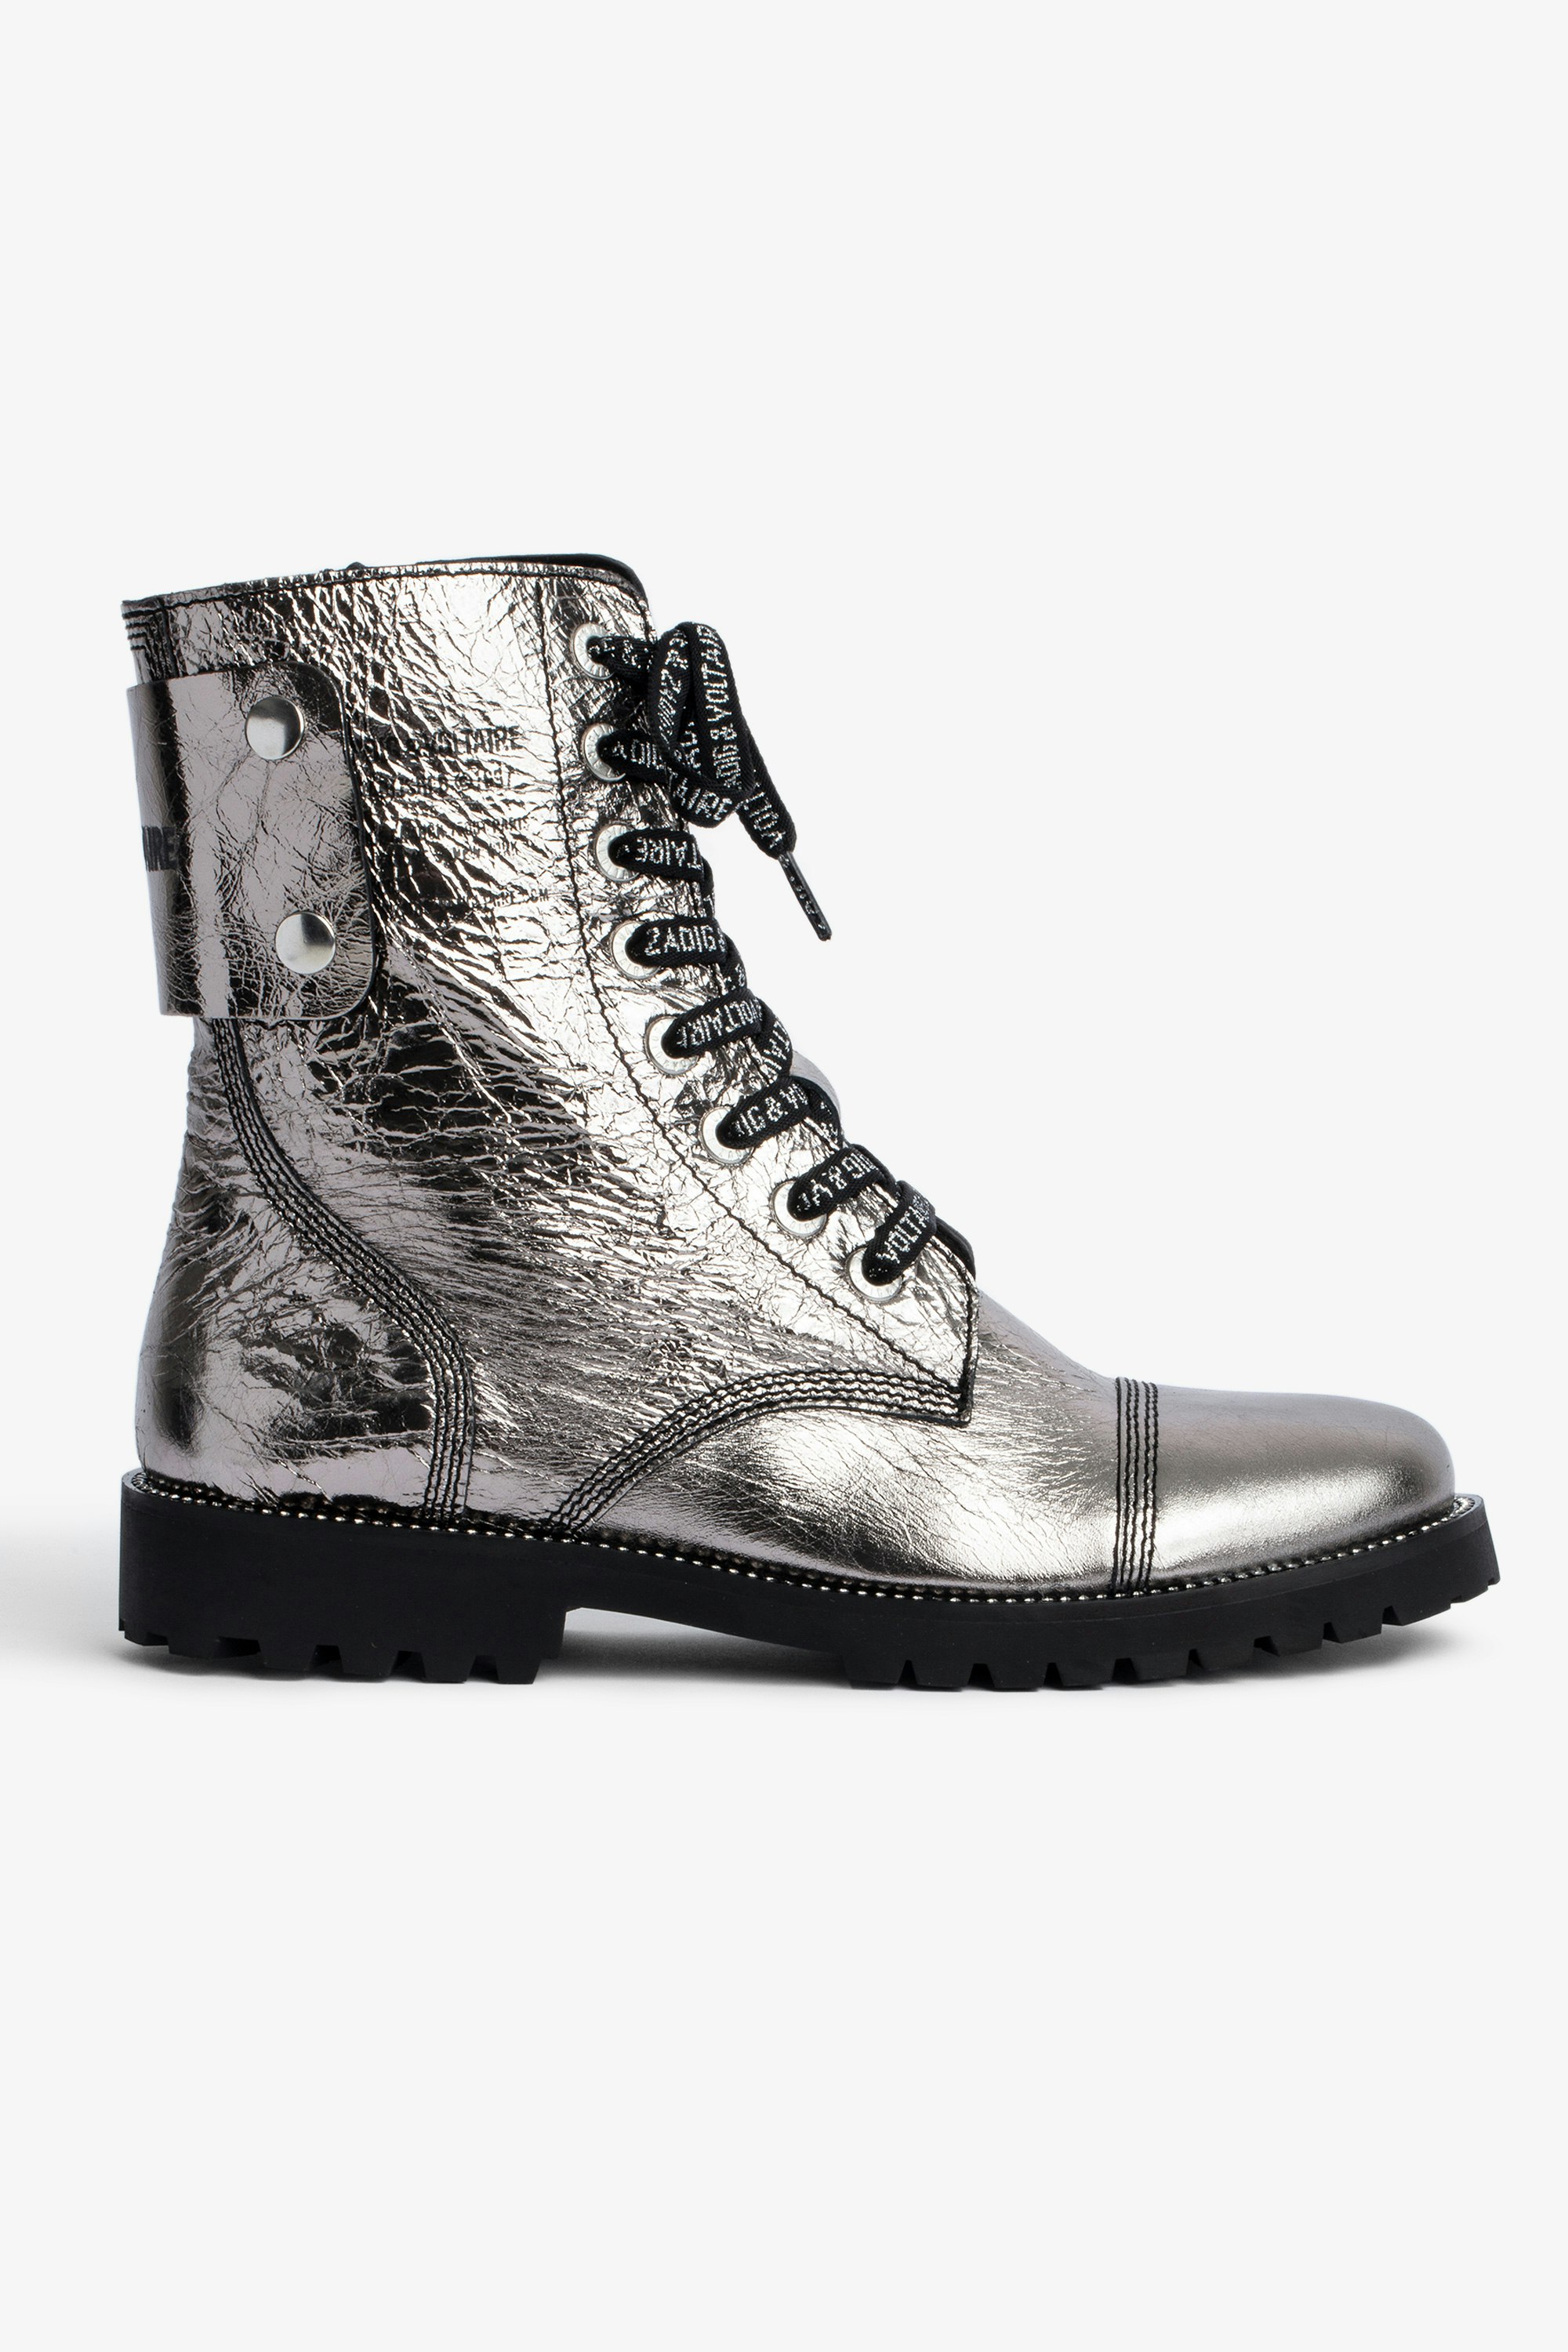 Joe Vintage Metal Ankle Boots Women's mid-calf boots in silver vintage leather